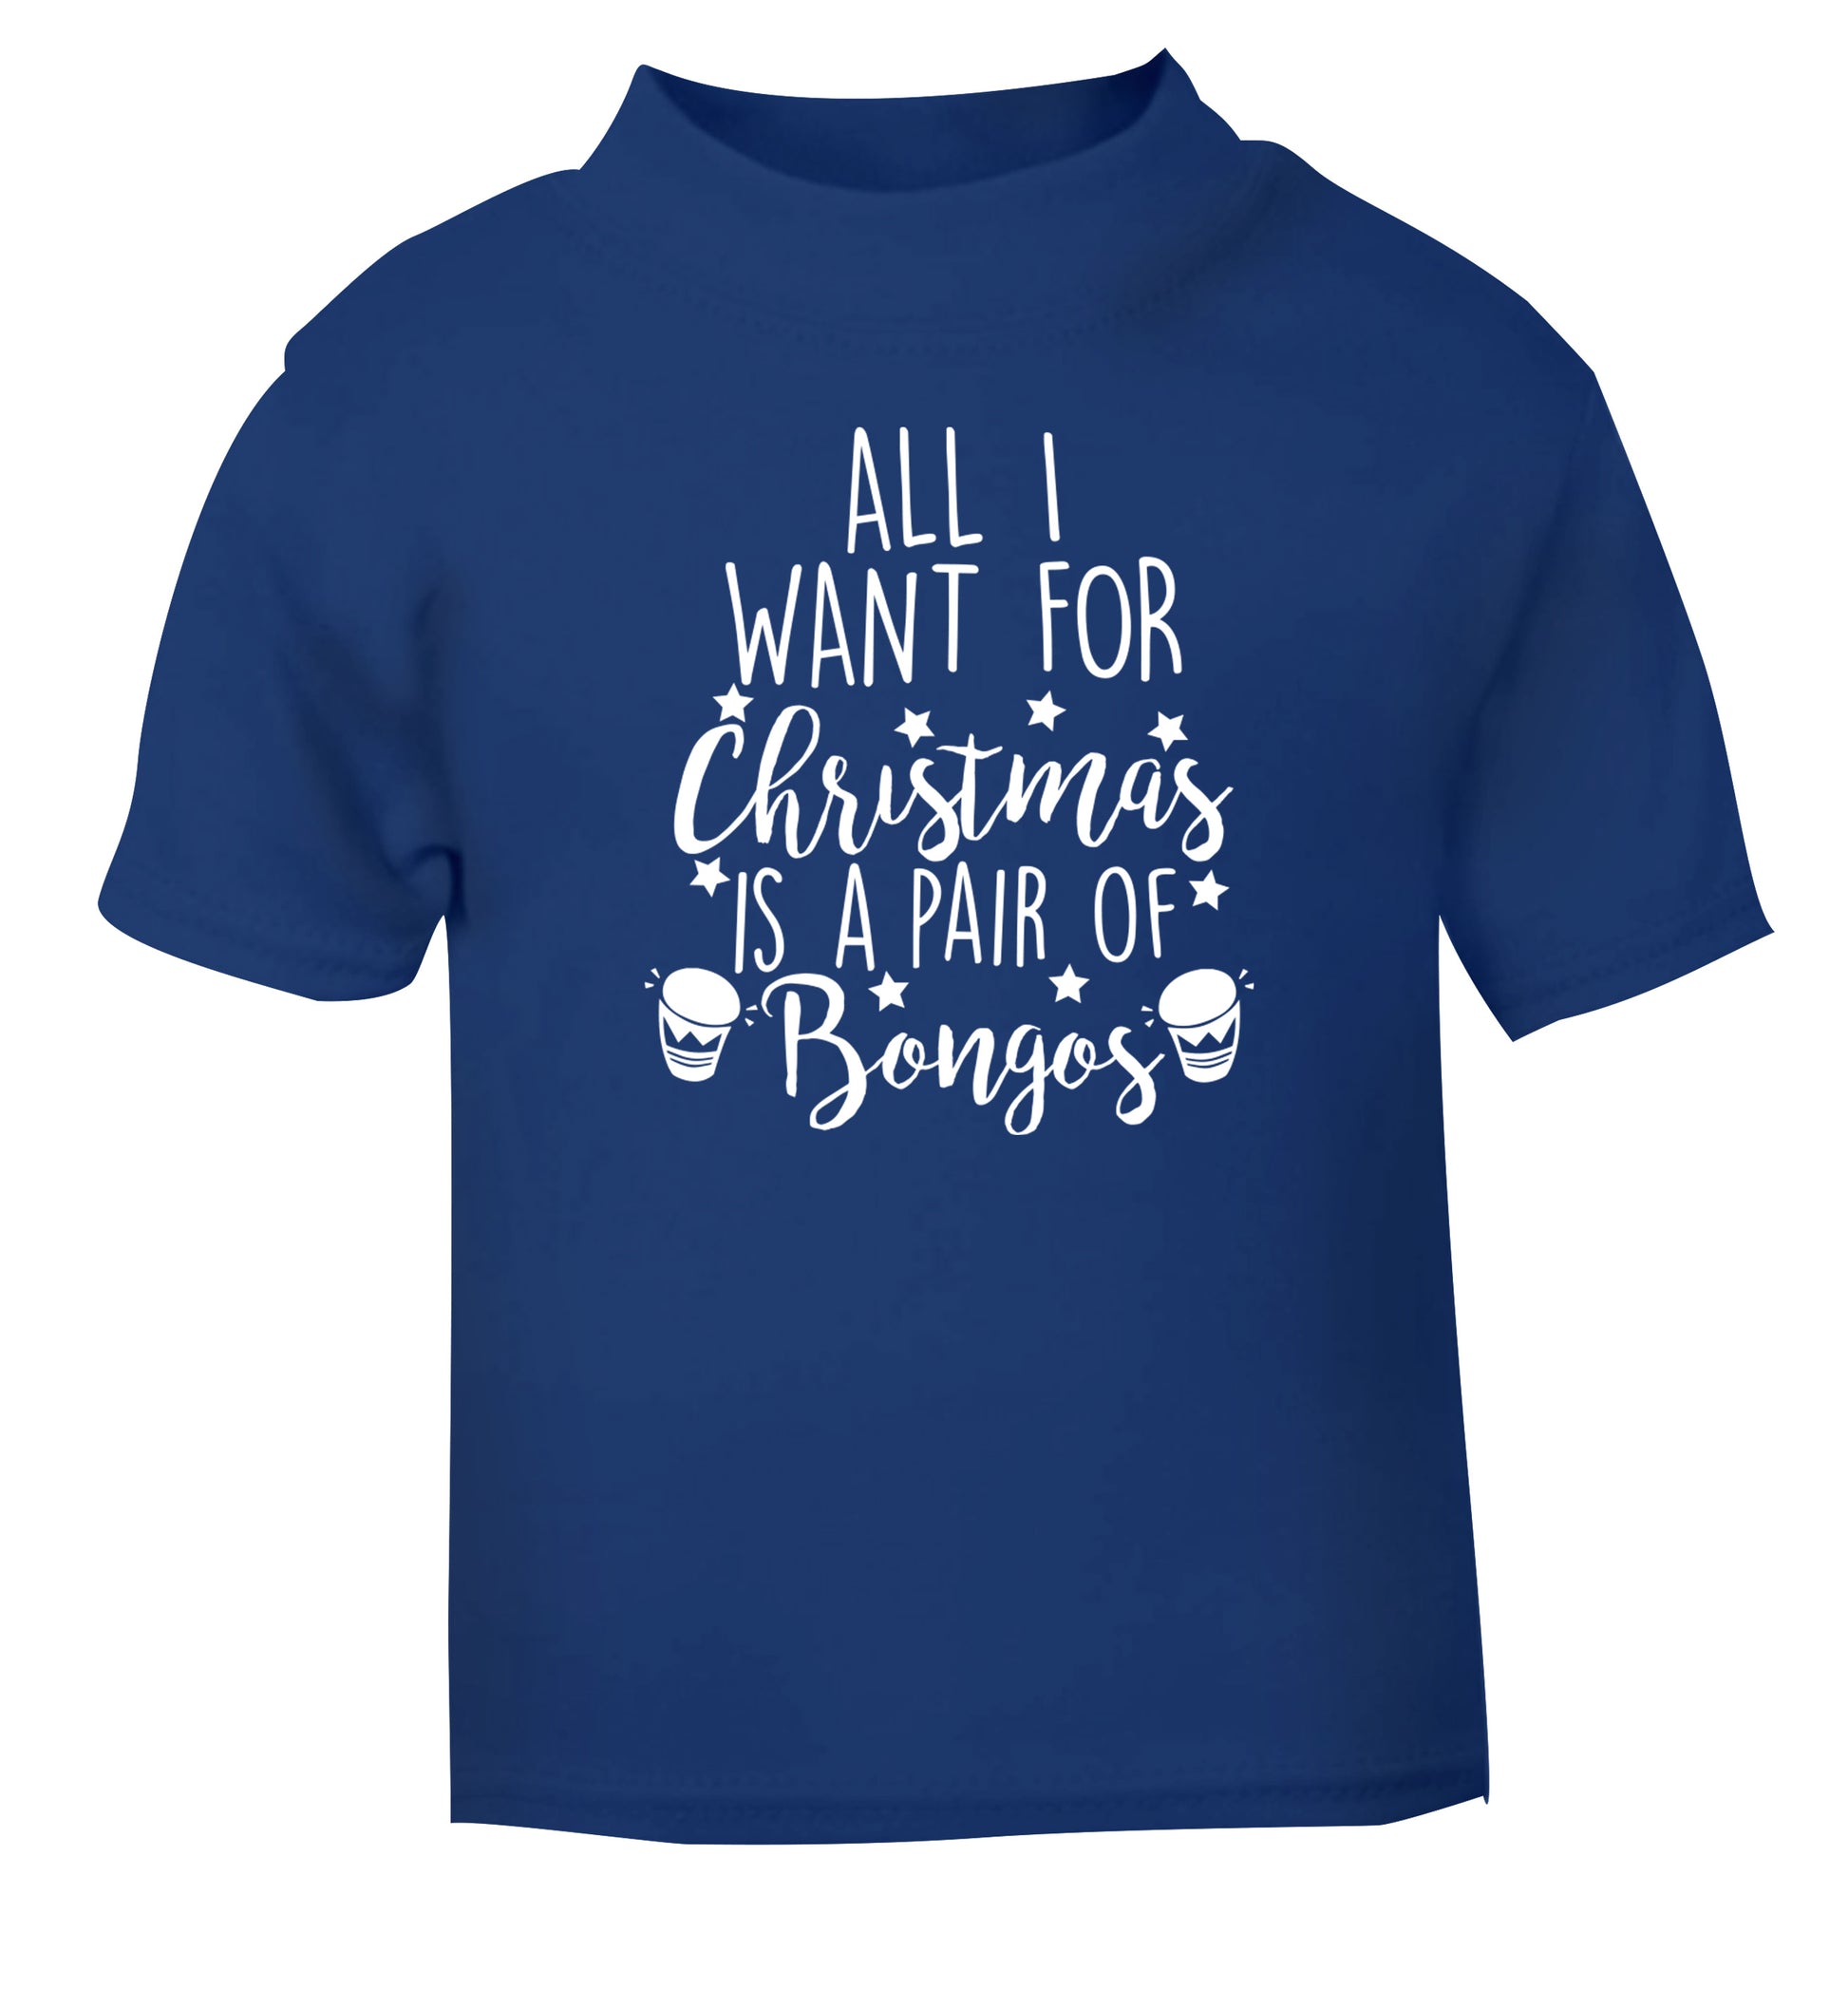 All I want for Christmas is a pair of bongos! blue Baby Toddler Tshirt 2 Years